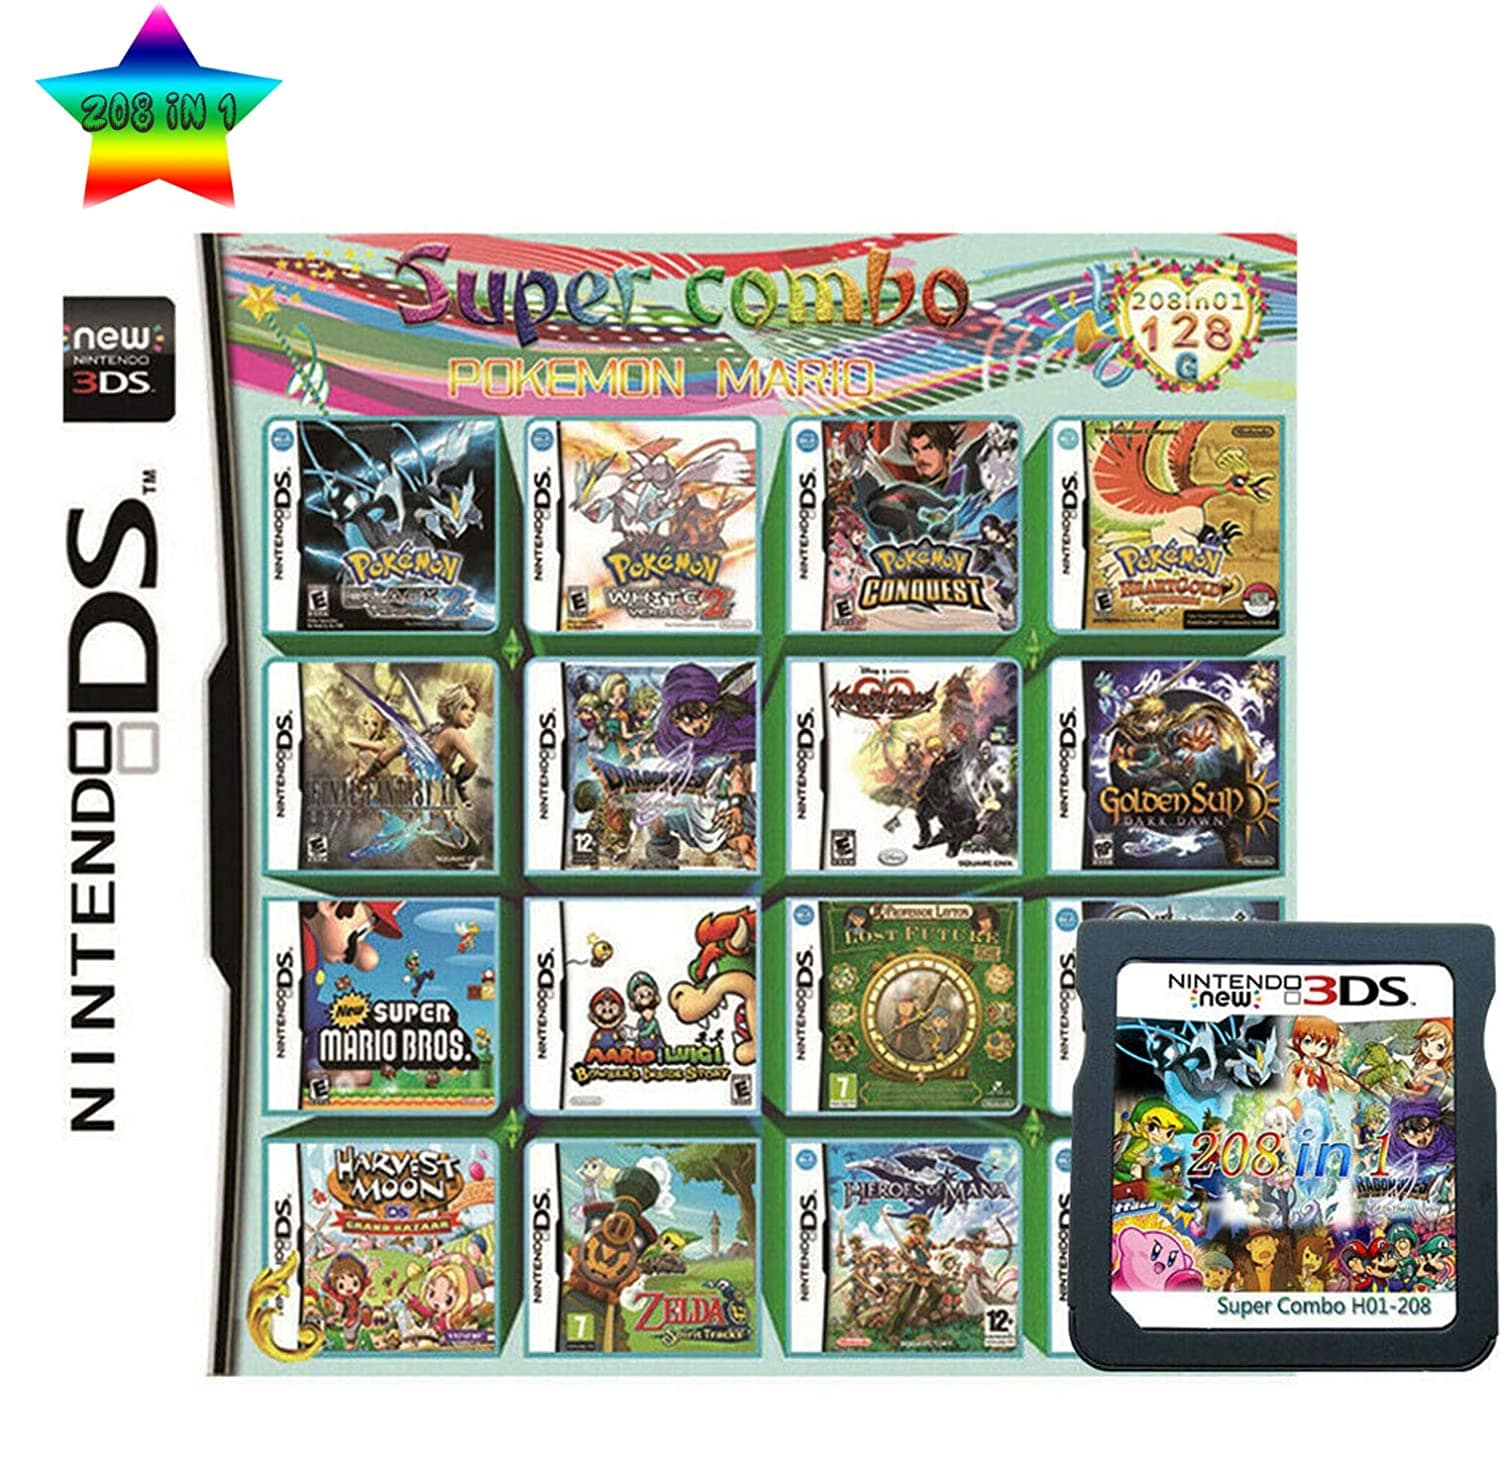 ik ben verdwaald fout werkwoord Buy 208 In 1 Video Game Compilation Card For Nintendo DS/3DS/2DS Console  Nintendo 3DS - Cheap - G2A.COM!